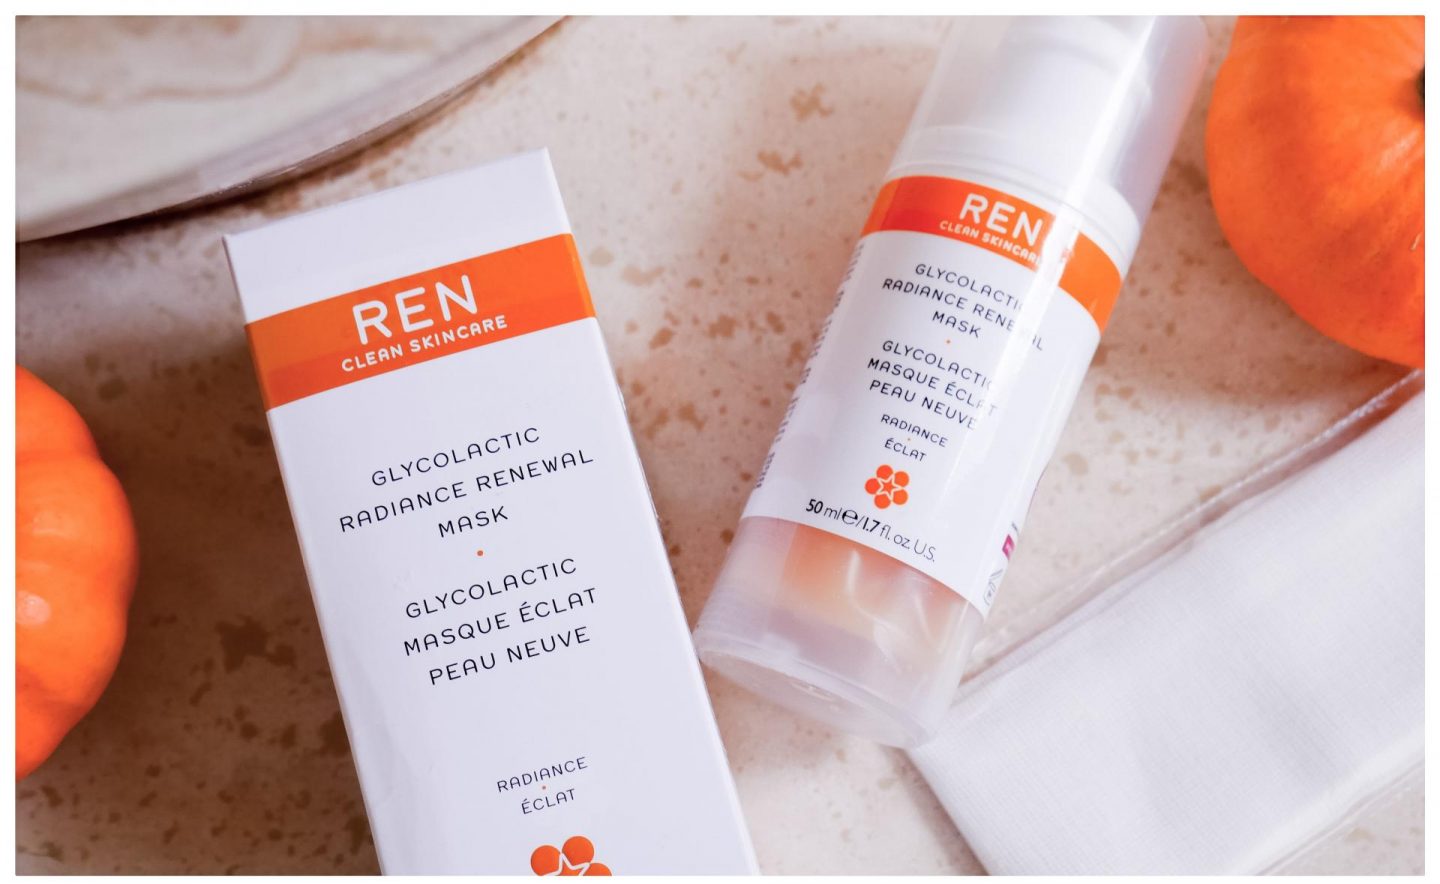 ren-skincare-glycolactic-radiance-renewal-mask-review-kitty-and-b